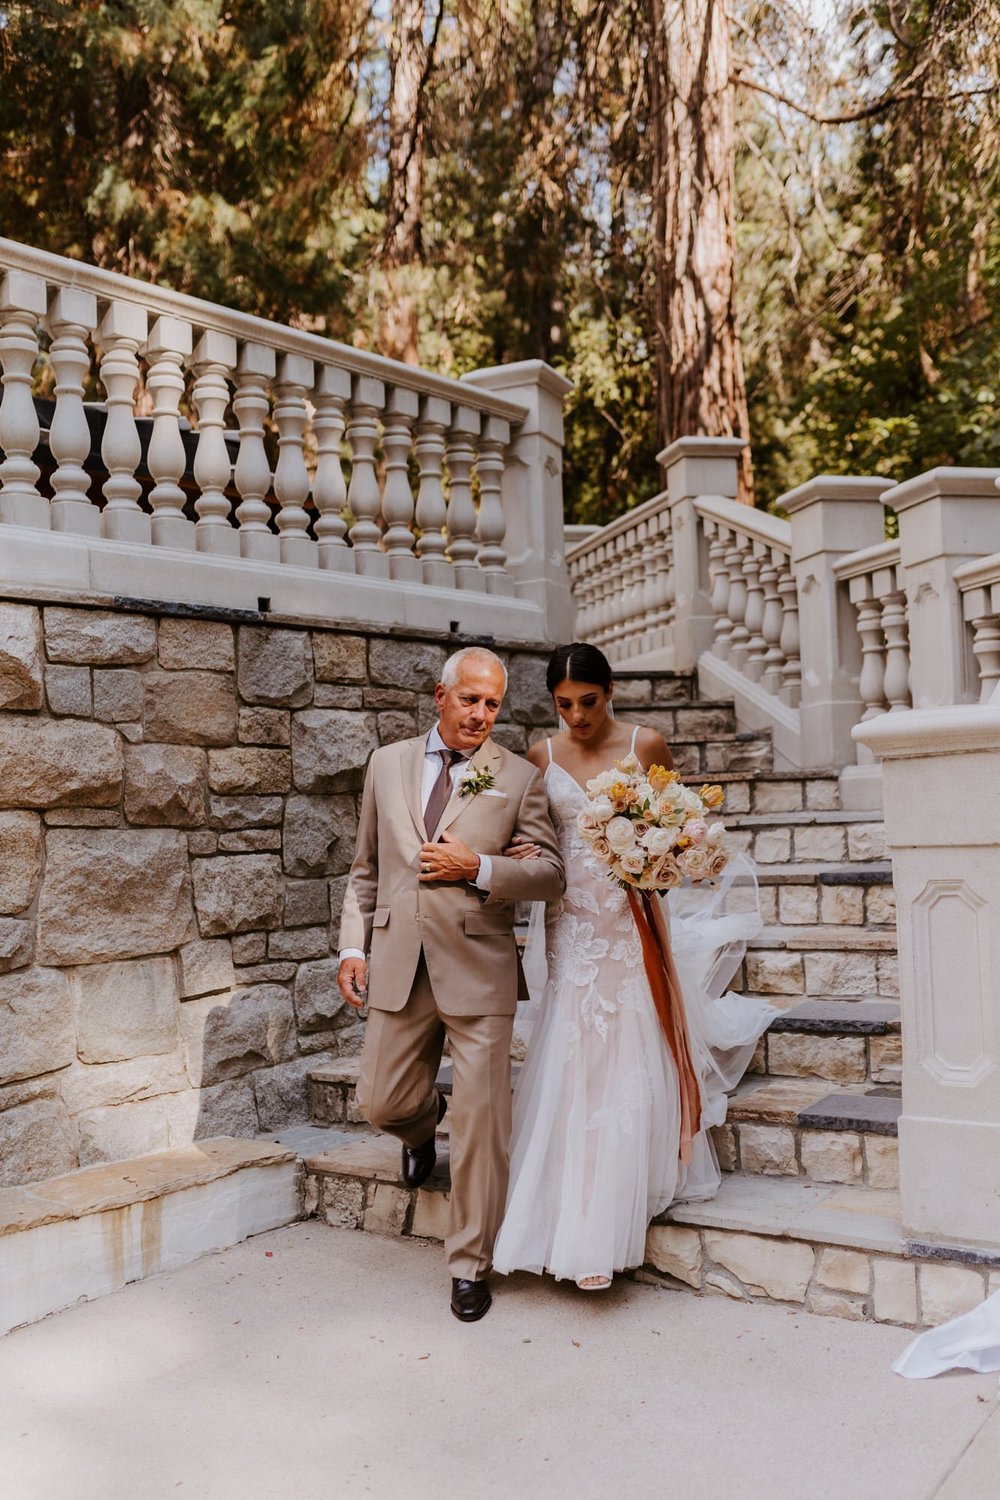 Father of the bride walking bride down the aisle, Castle in the Forest Lake Arrowhead Wedding Ceremony Set Up,  Photo by Tida Svy